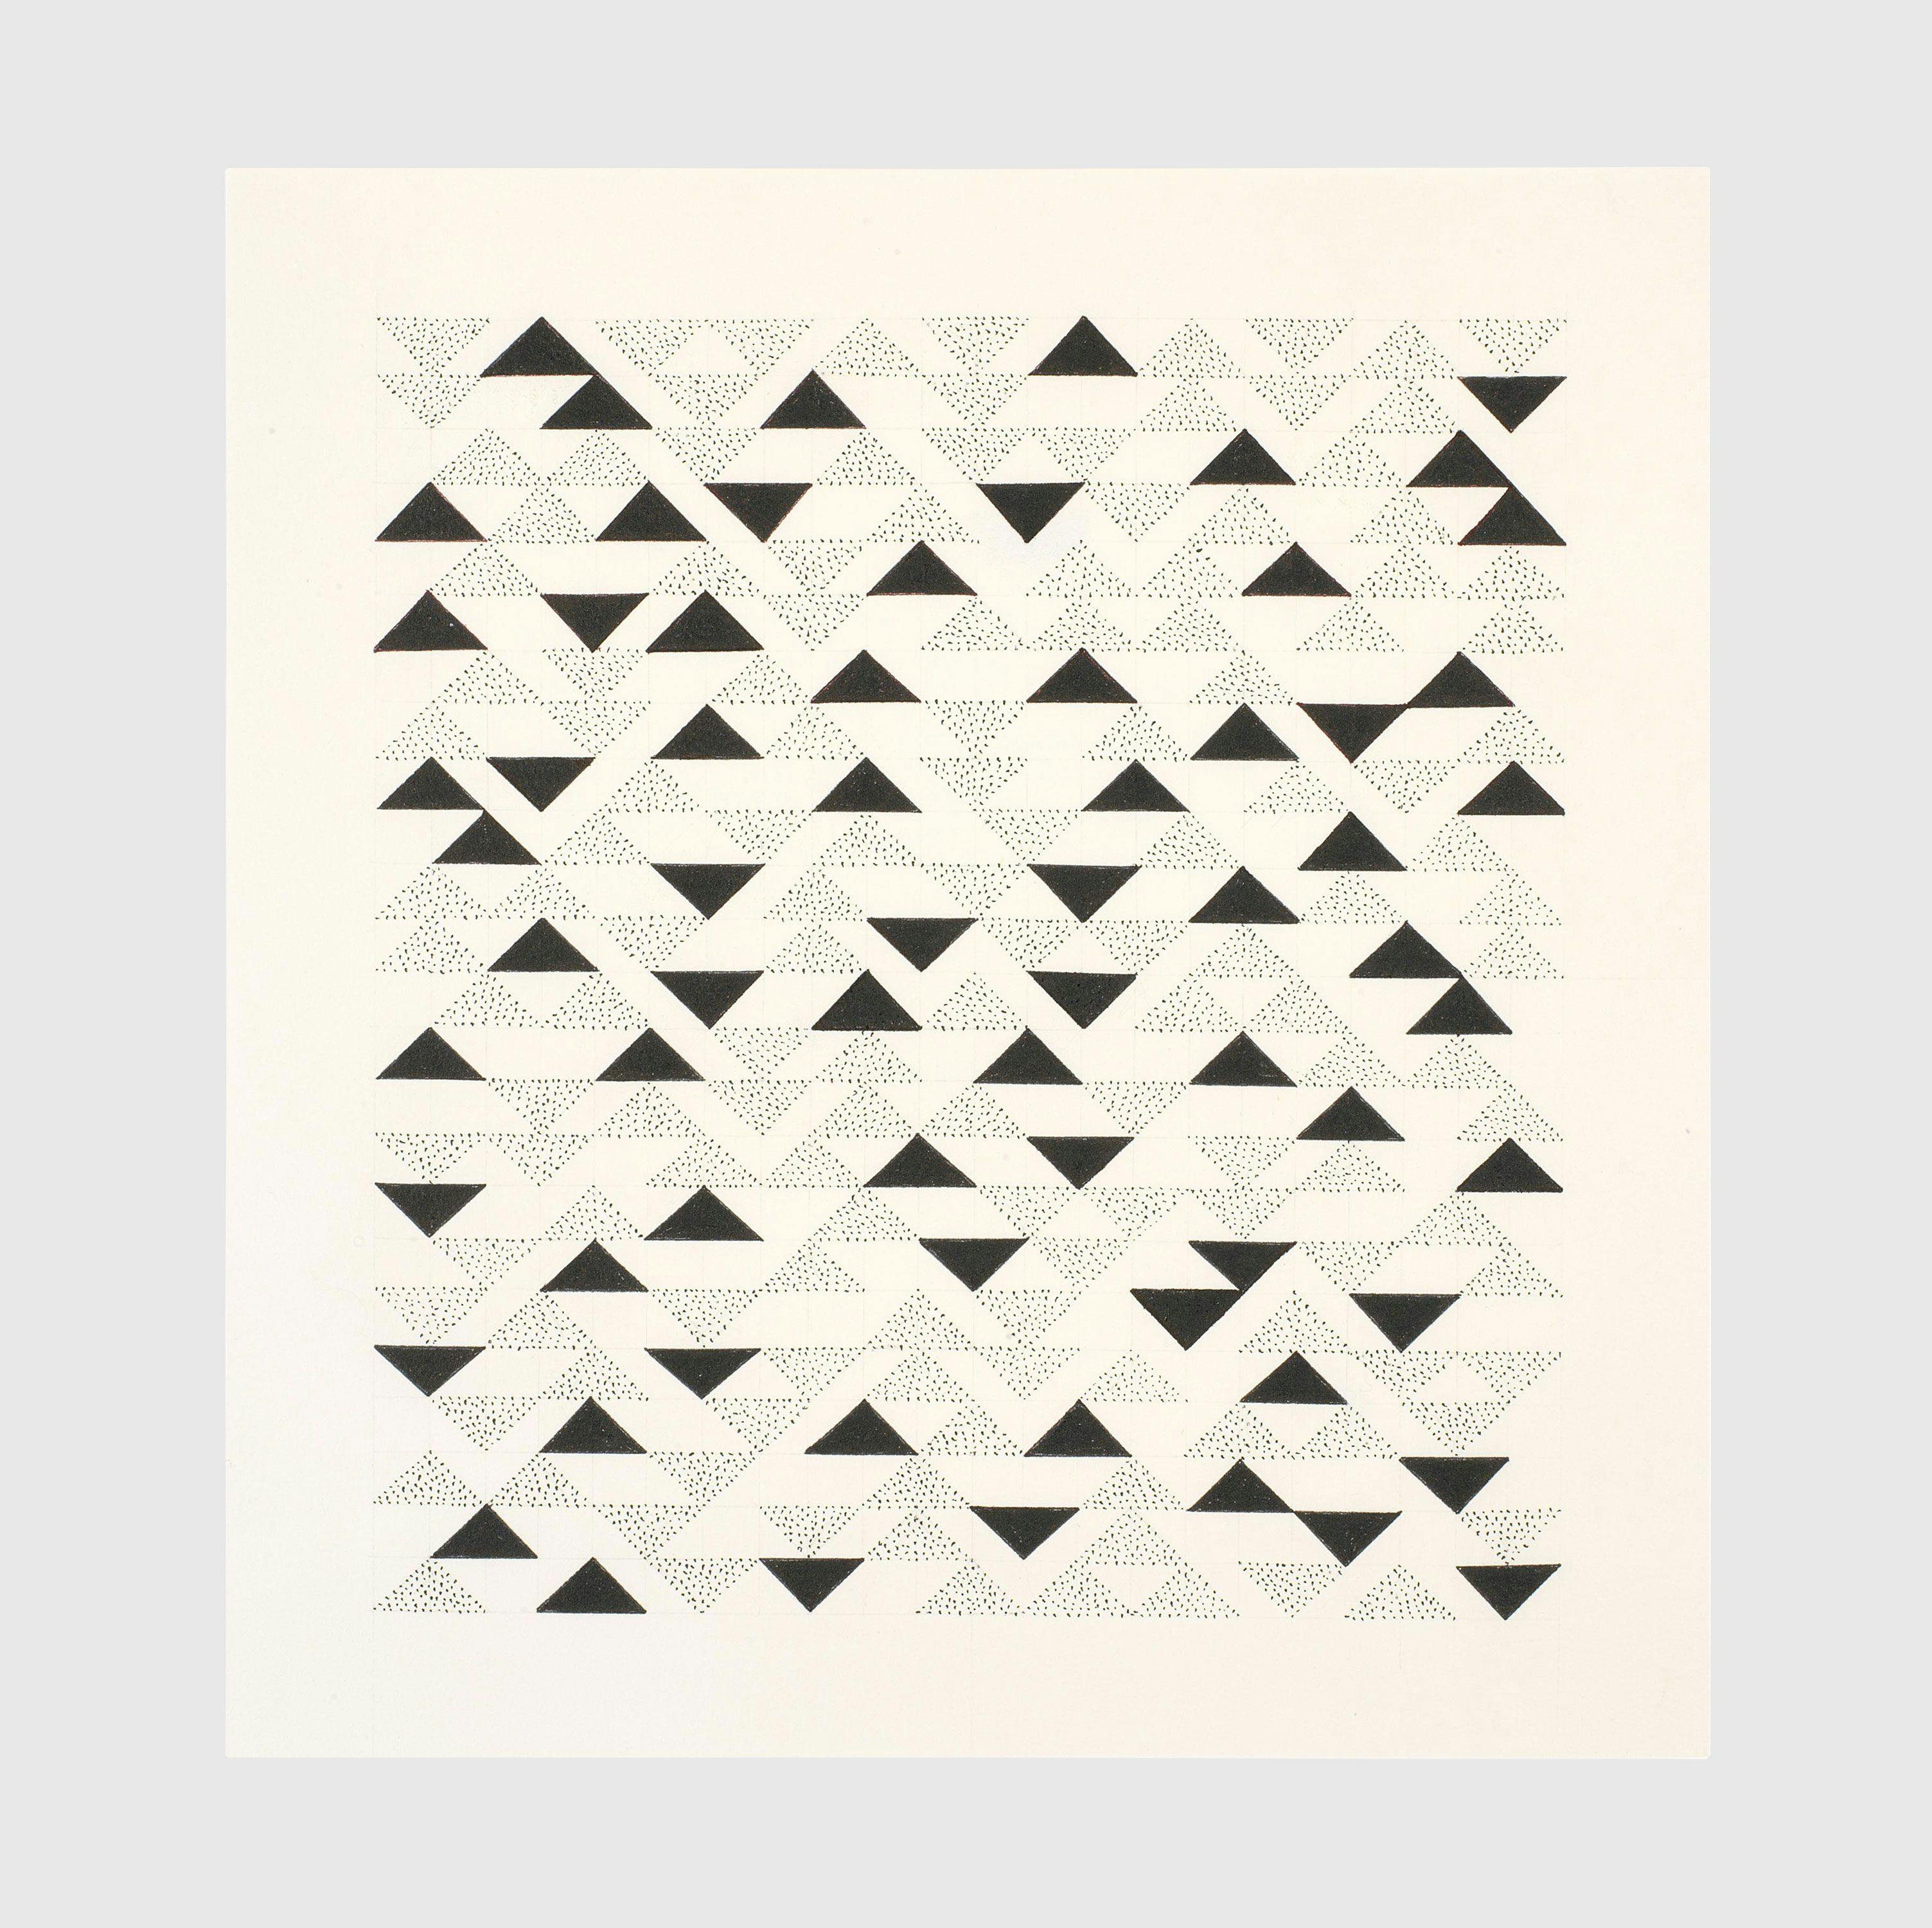 A drawing by Anni Albers, titled Study for Triangulated Intaglio III, dated 1976.